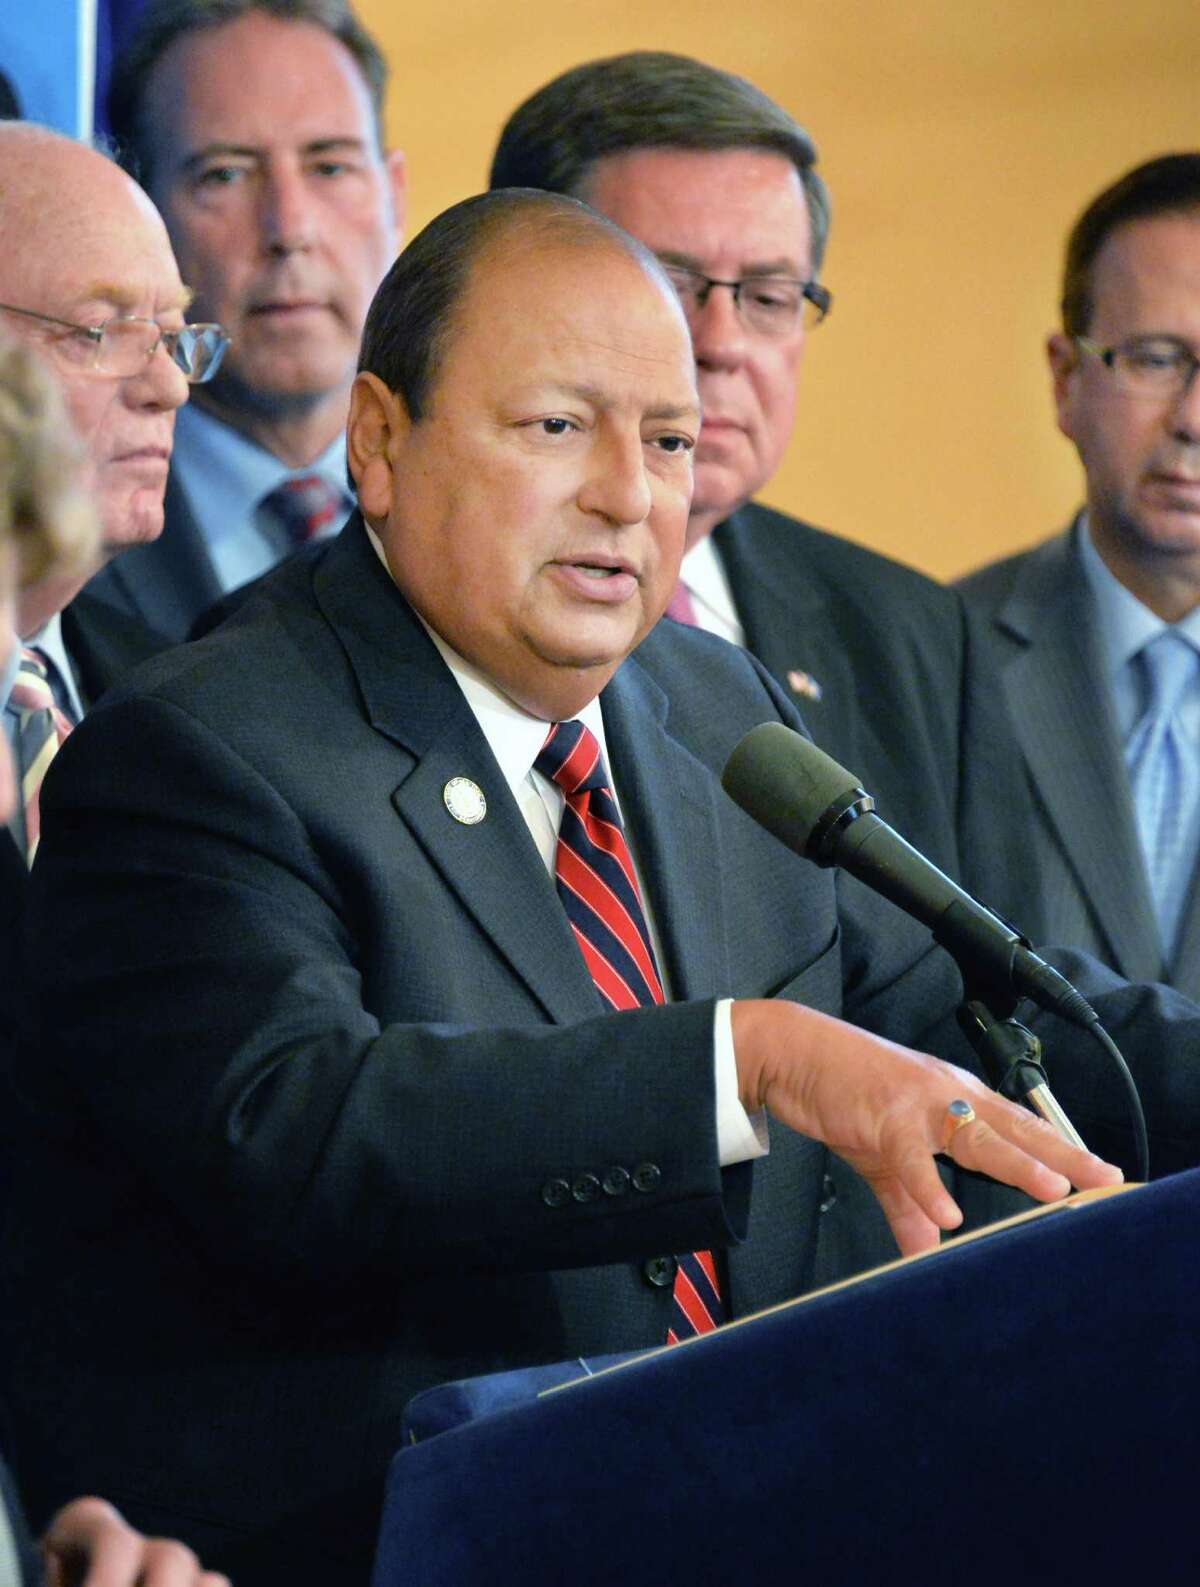 State Senator Tom Libous speaks during a news conference on the Public Assistance Integrity Act Tuesday, June 18, 2013, at the Capitol in Albany, N.Y. (John Carl D'Annibale / Times Union archive)